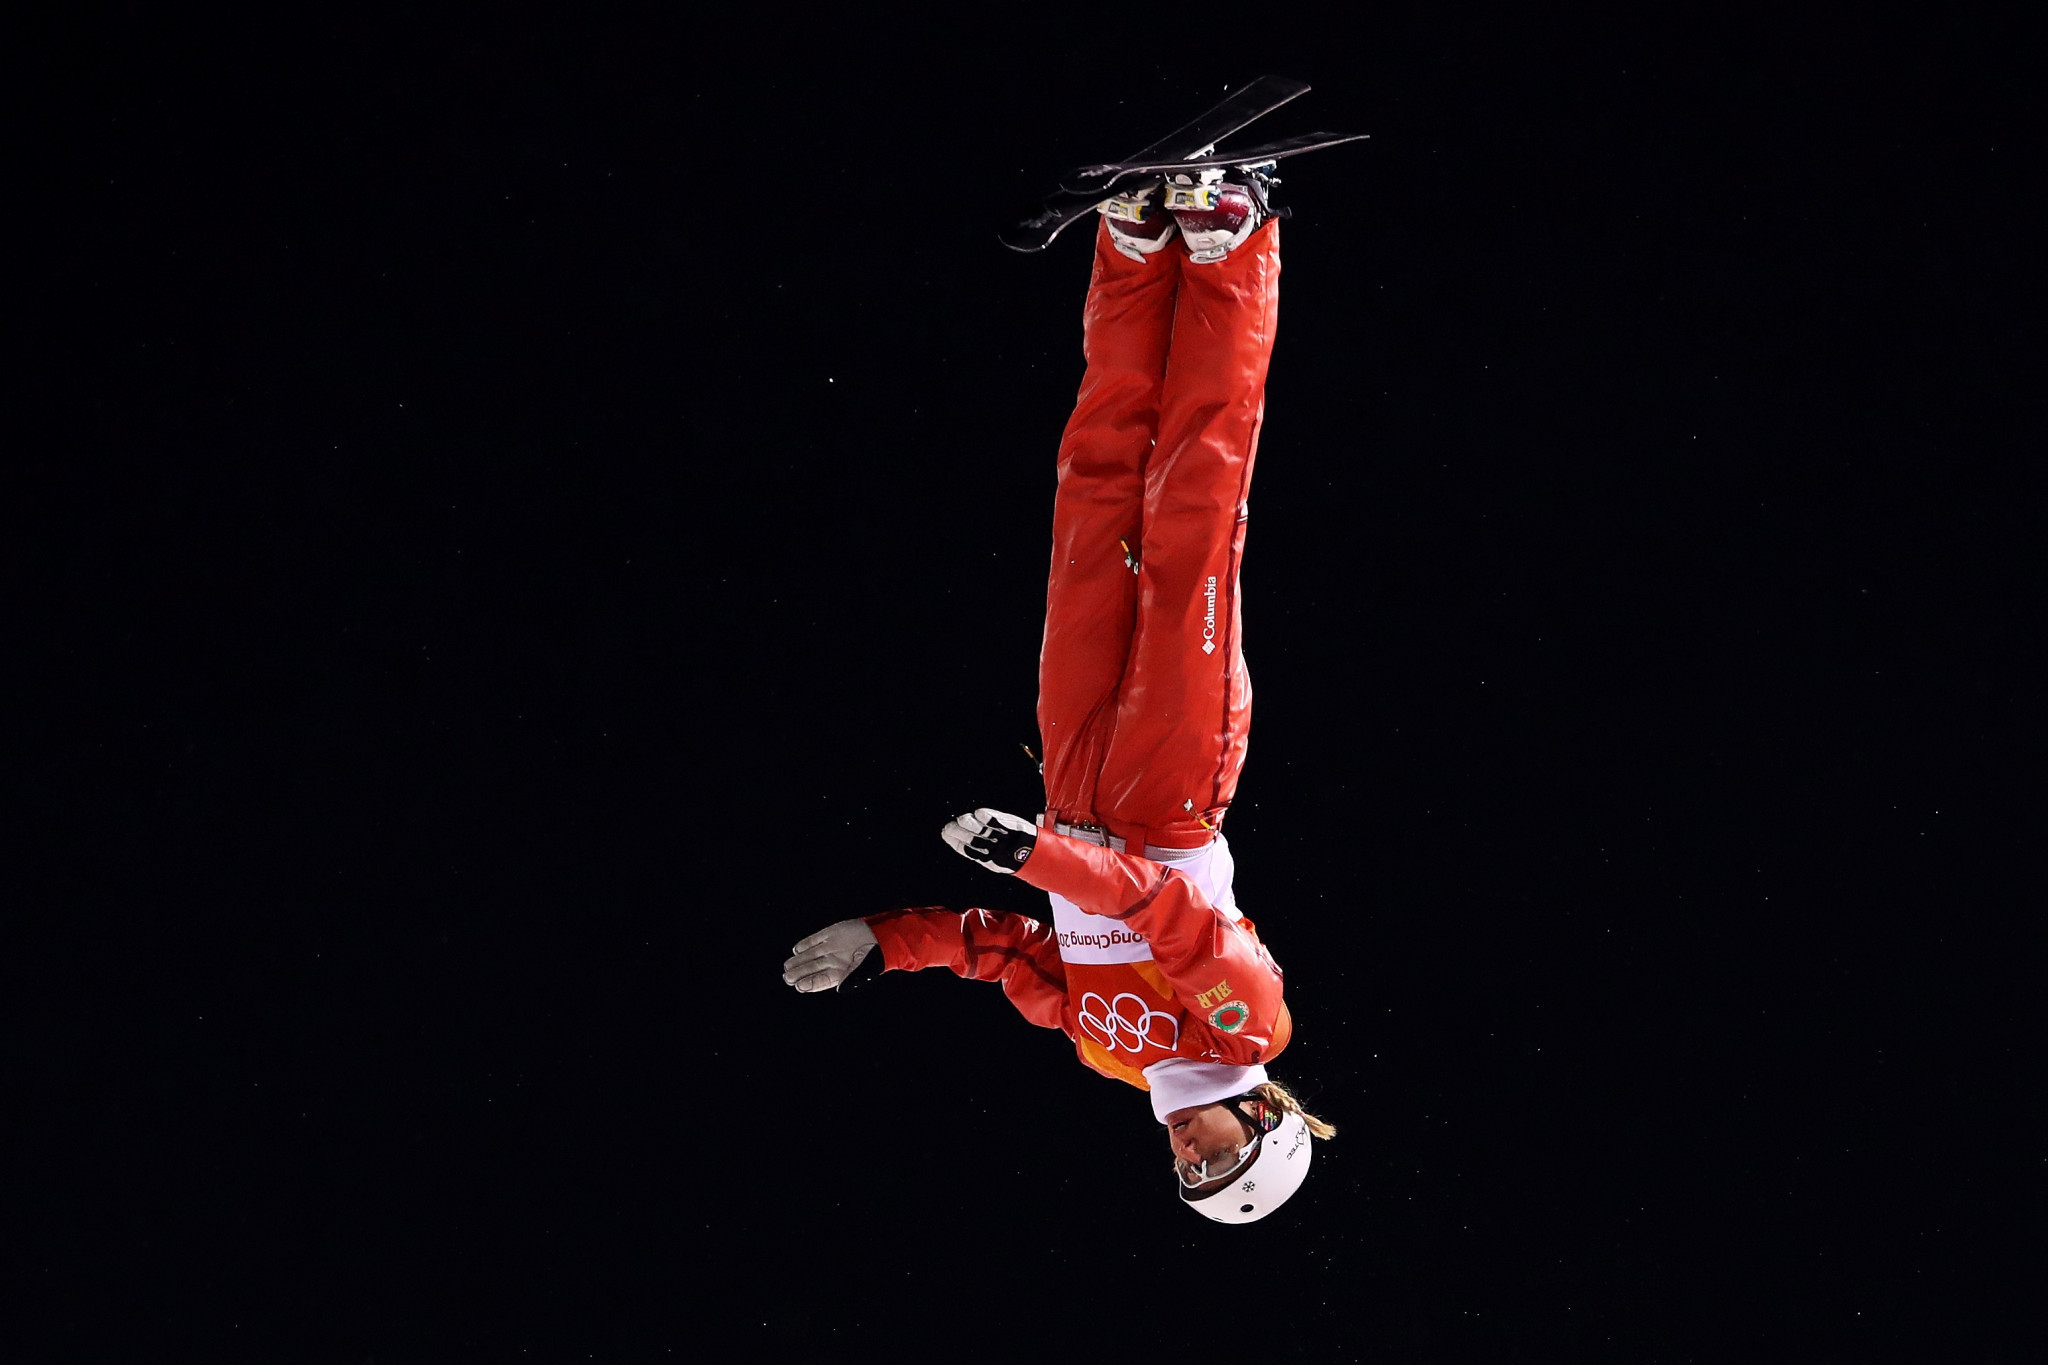 Aerials Olympic champion Hanna Huskova is one of the athletes to be honoured ©Getty Images